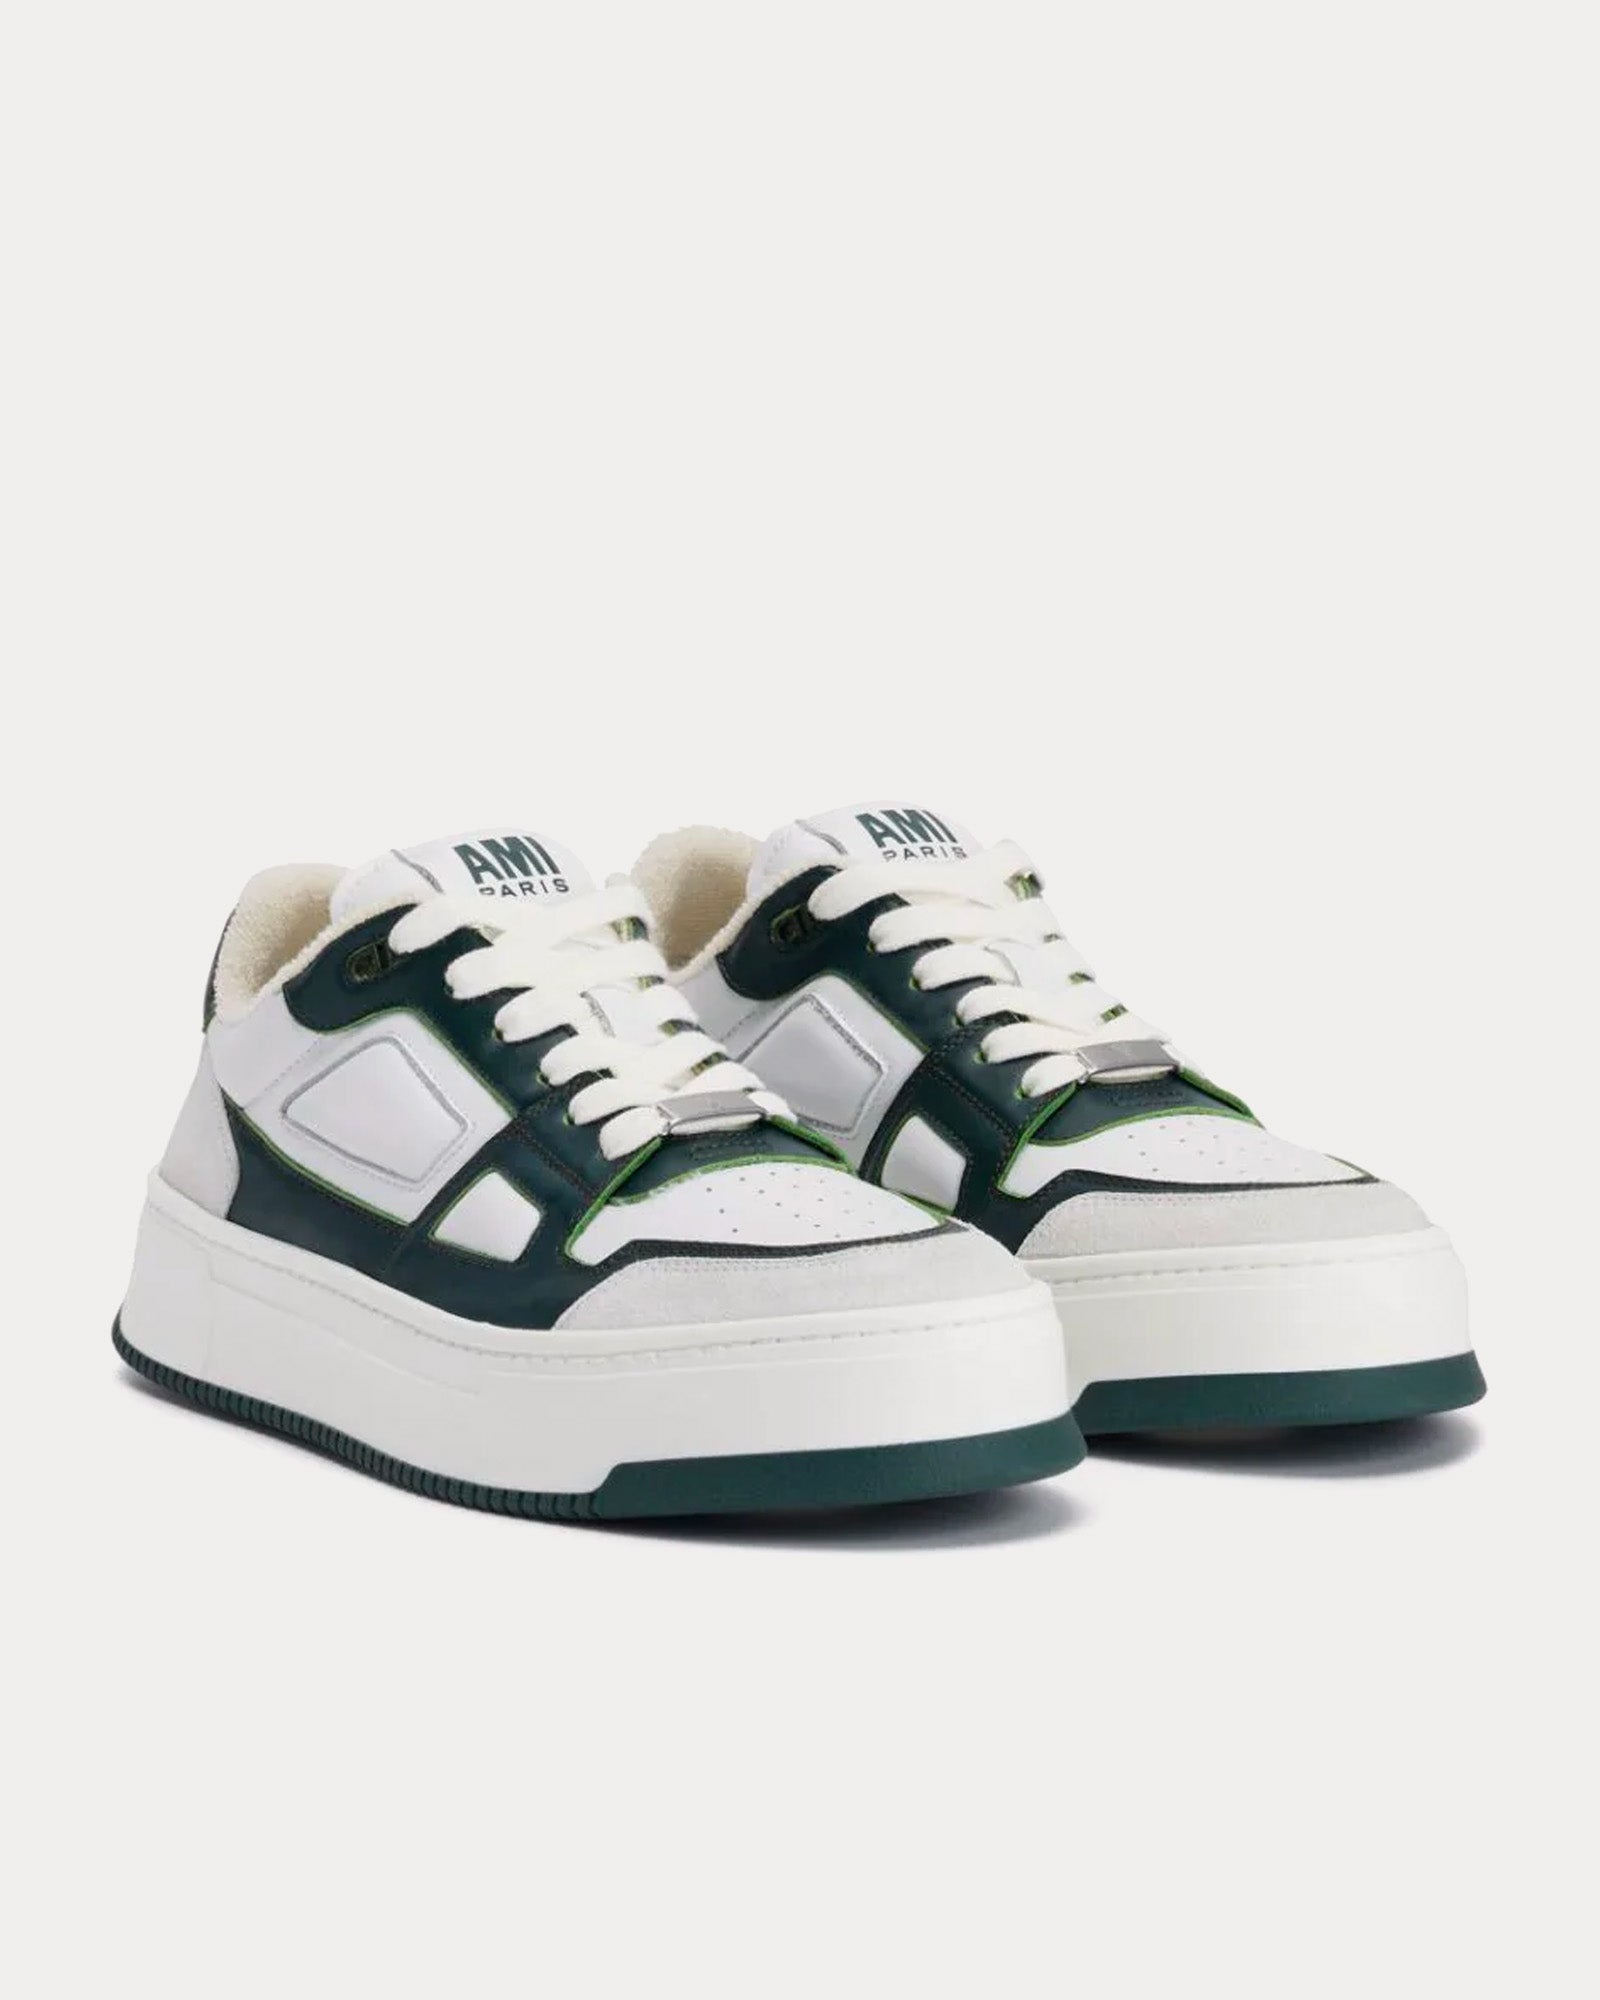 AMI - Arcade Leather Bottle Green / White Low Top Sneakers